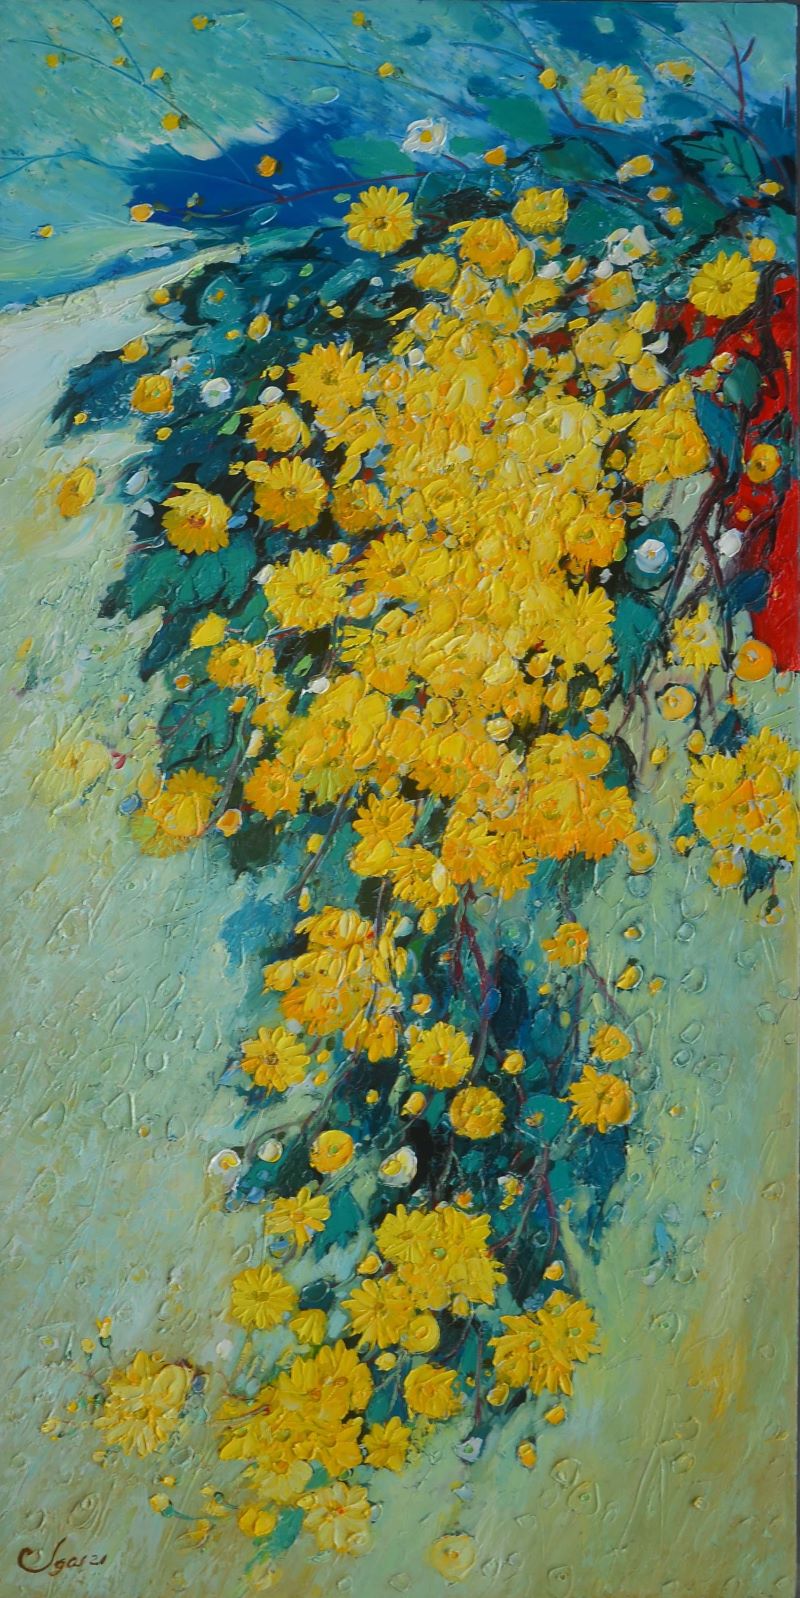 Daisies I - Vietnamese Oil Paintings by Artist Dang Dinh Ngo